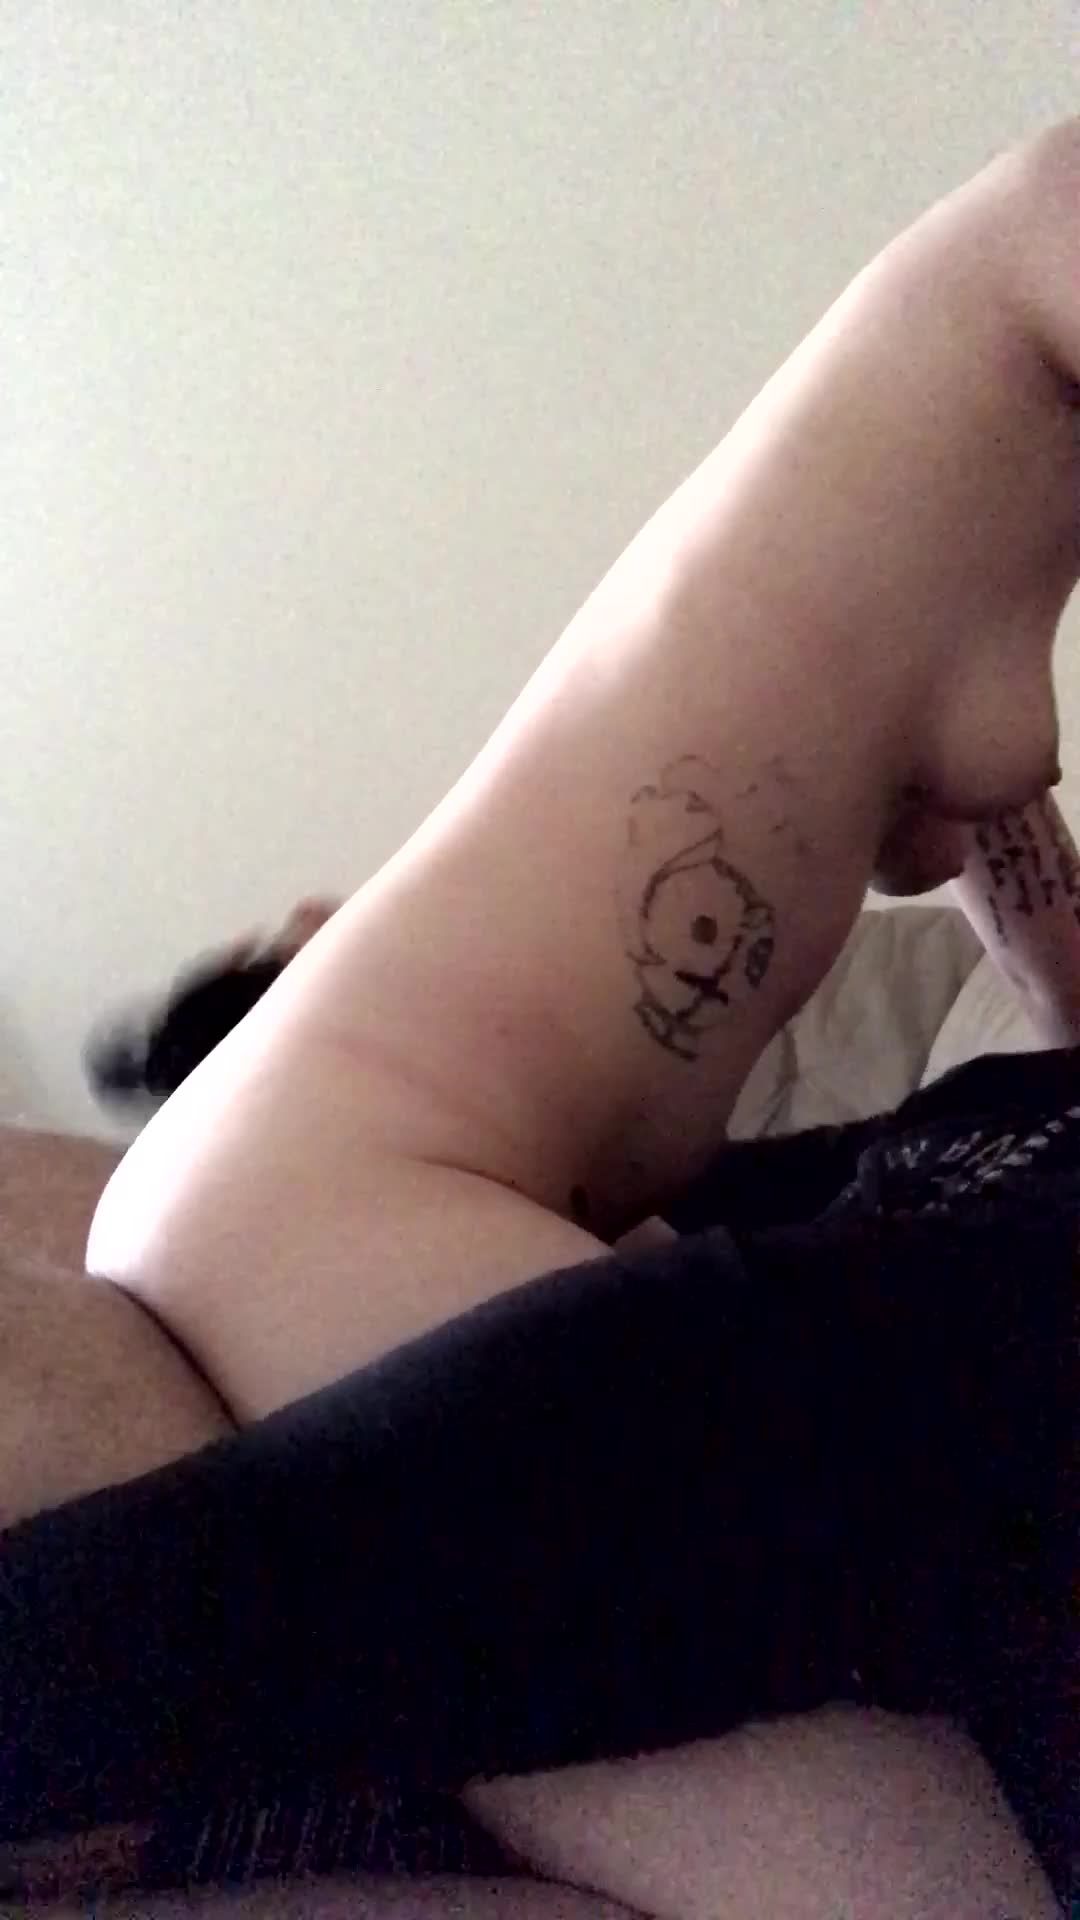 I ride him till he shoots cum in mouth